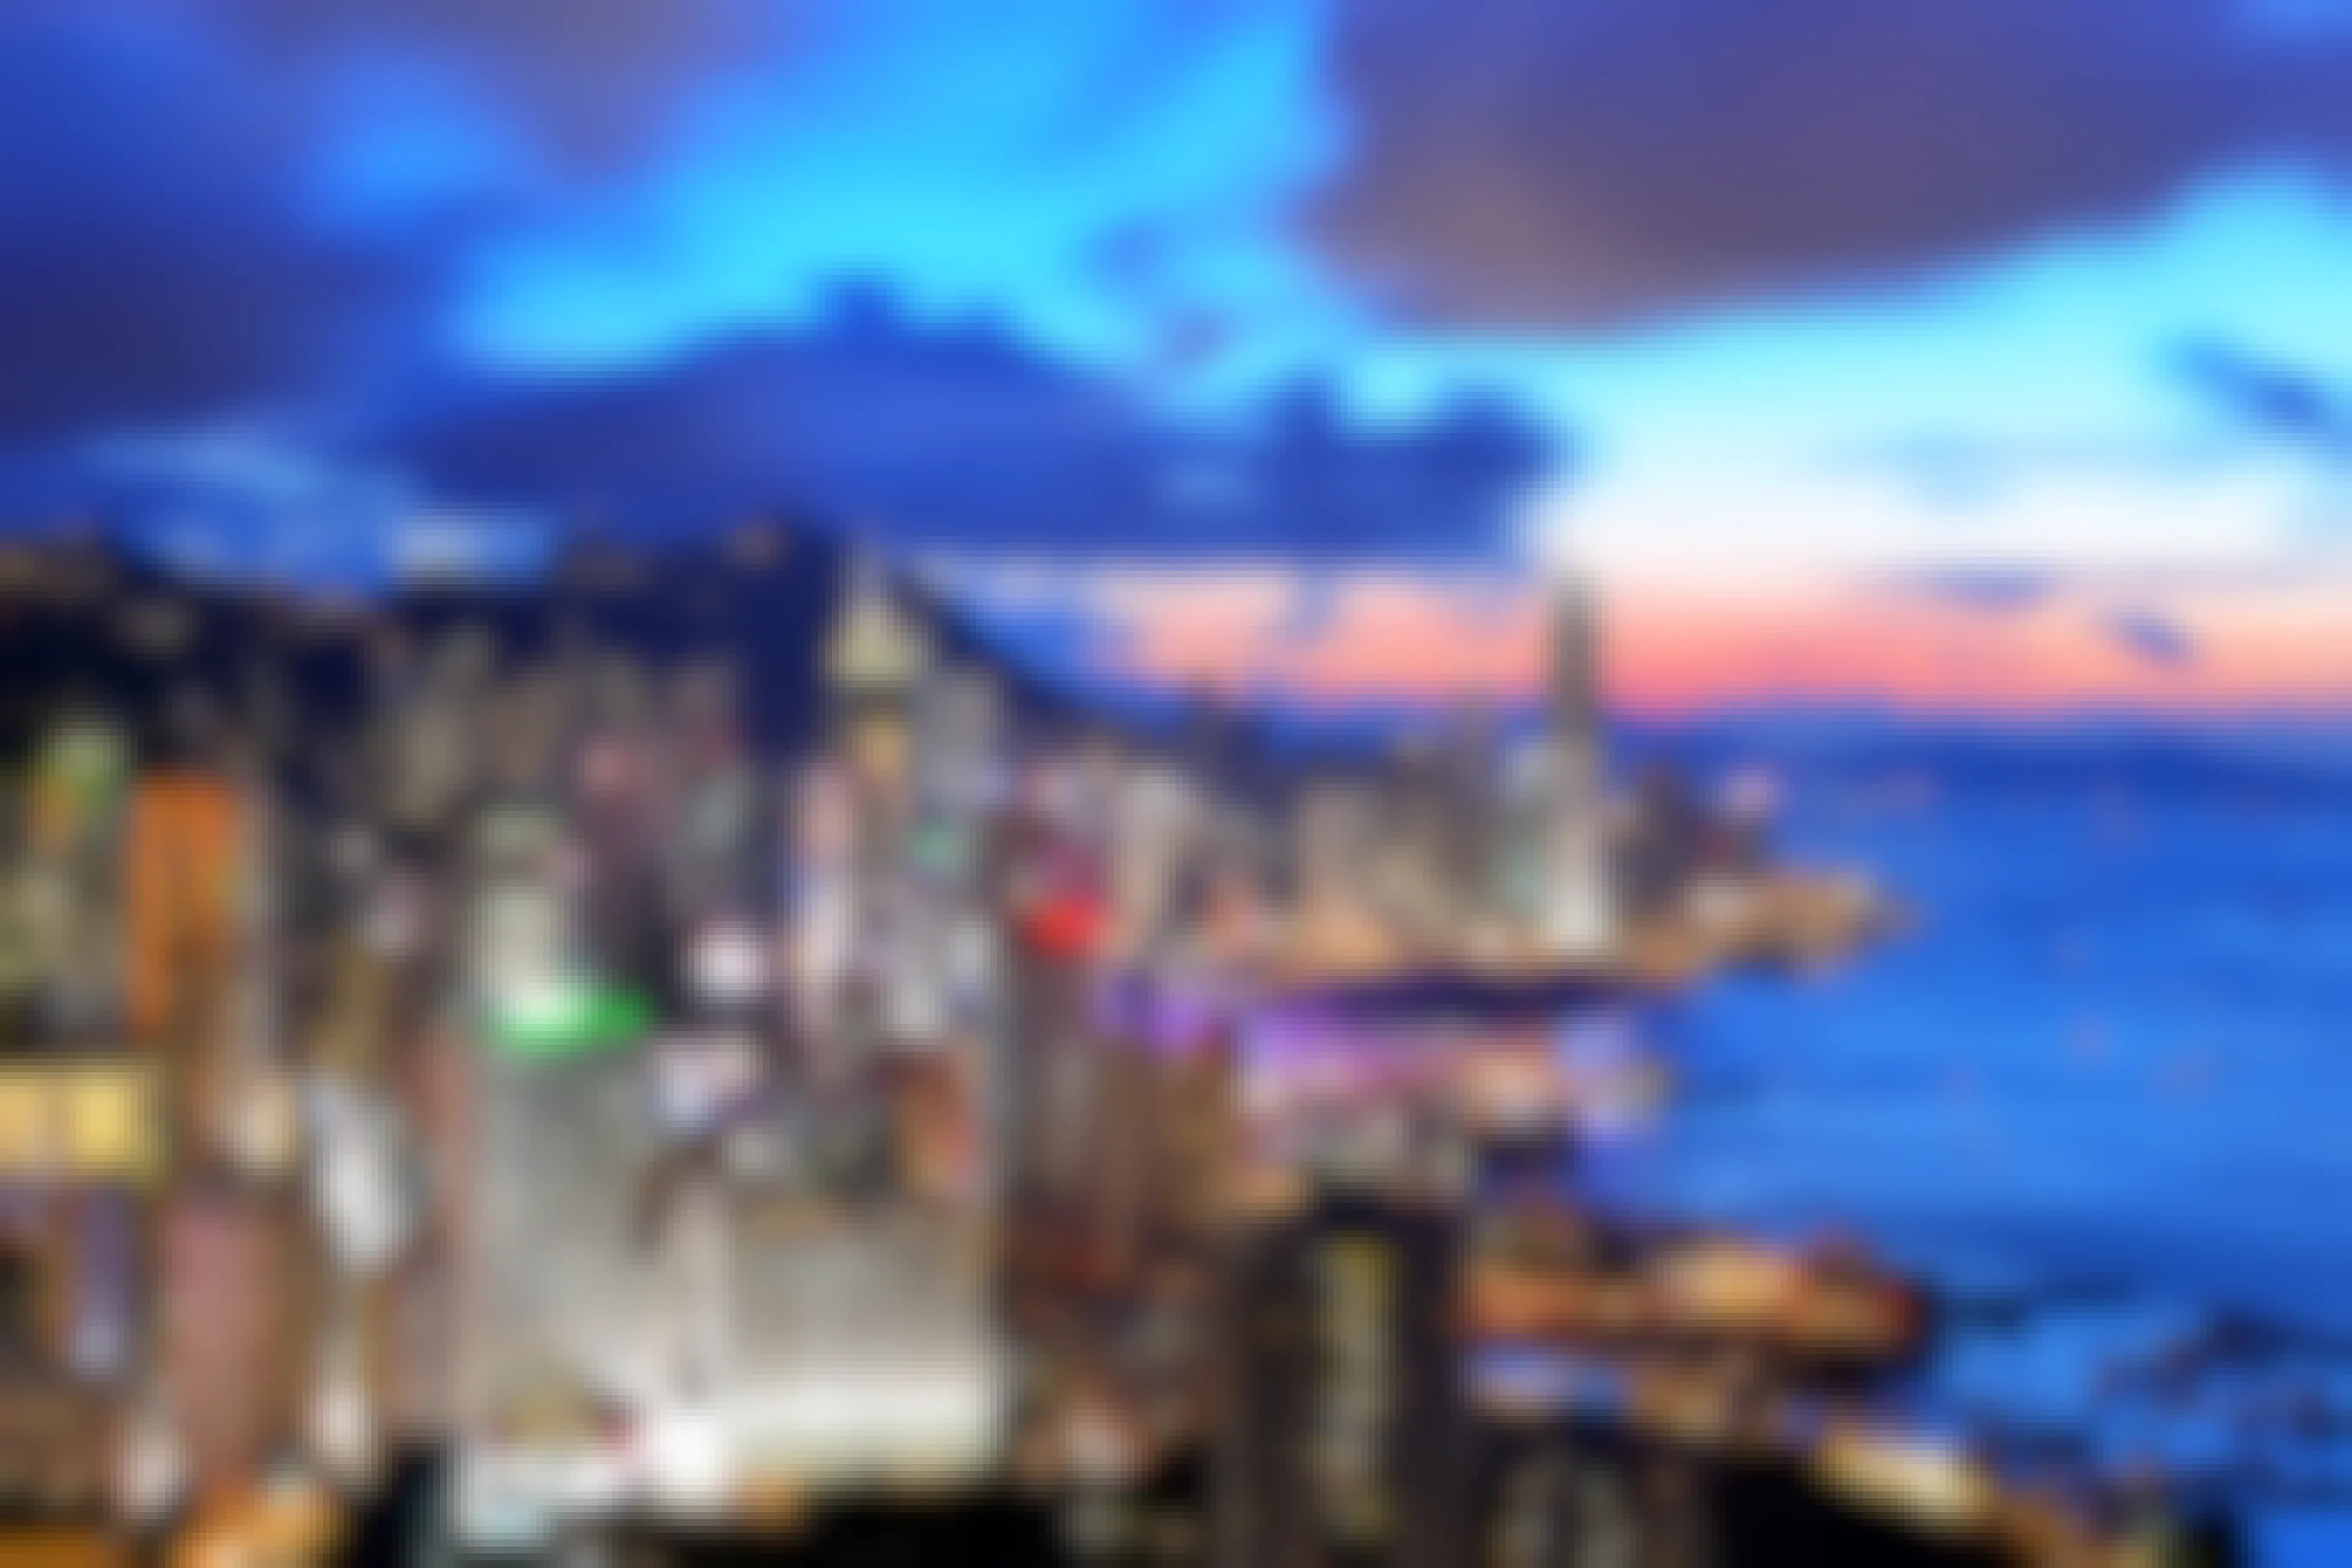 500,000 Free Plane Tickets to Hong Kong Going Up for Grabs